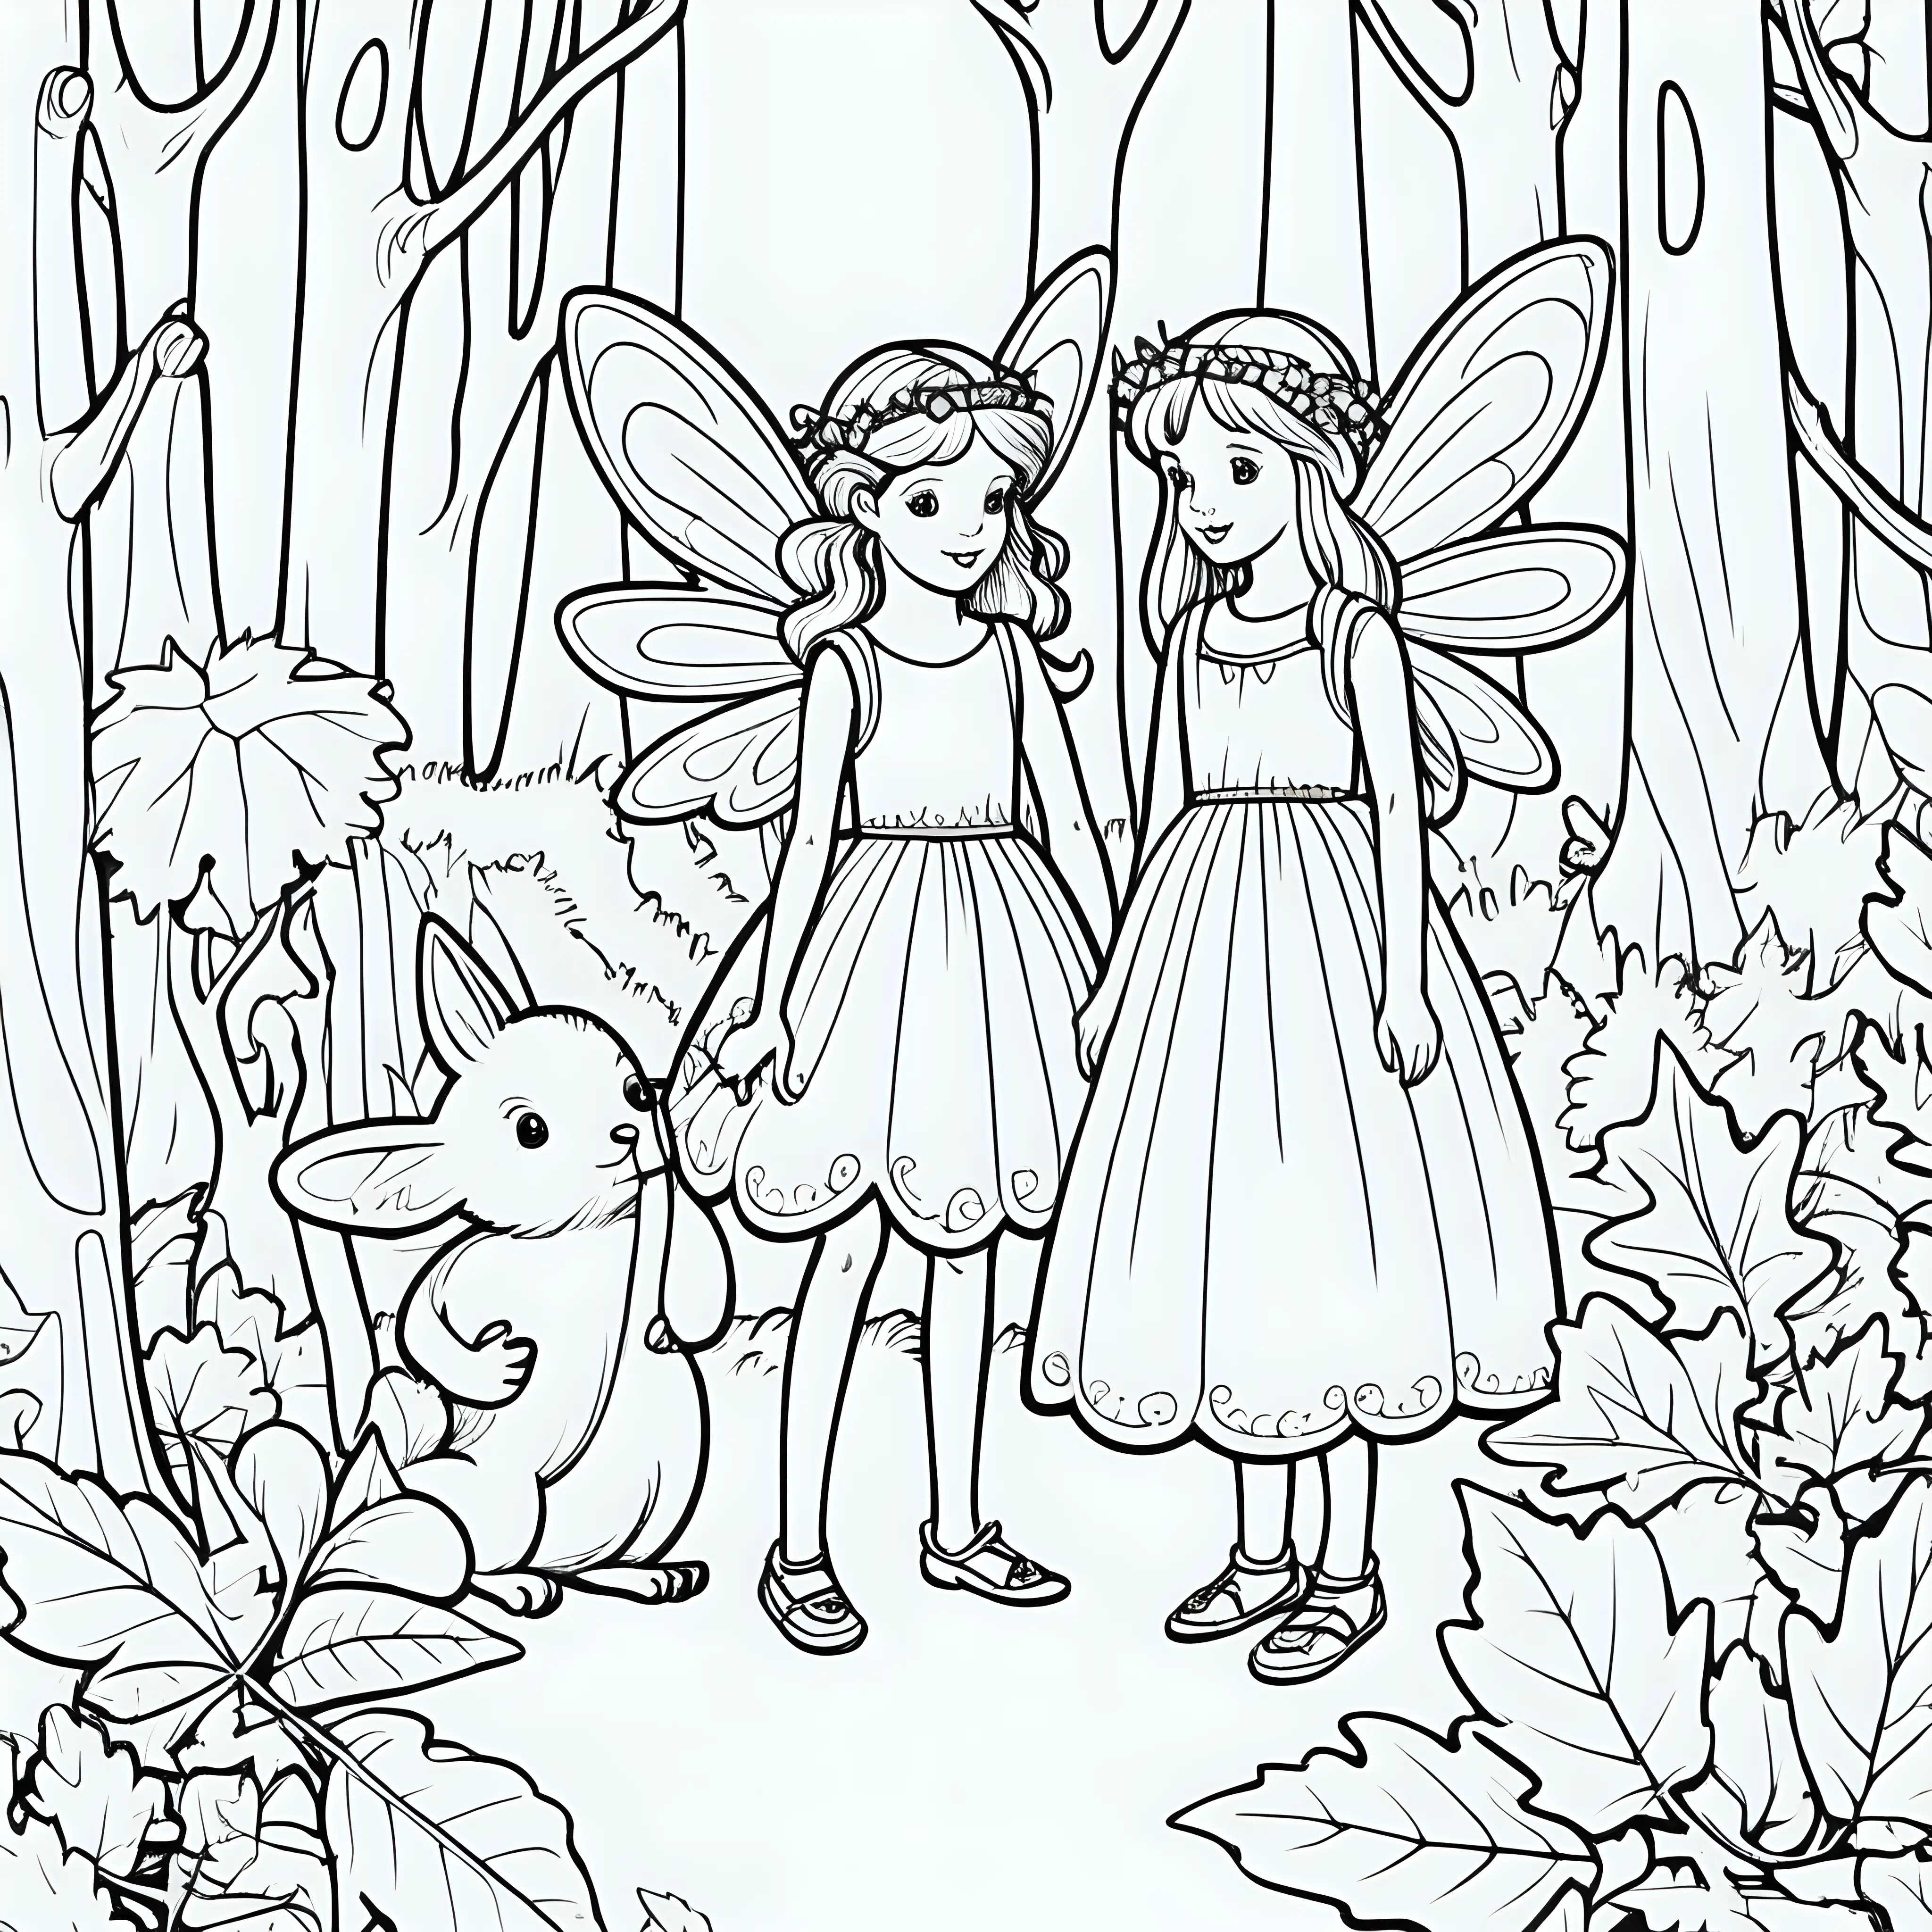 Woodland Fairies Coloring Page for Children